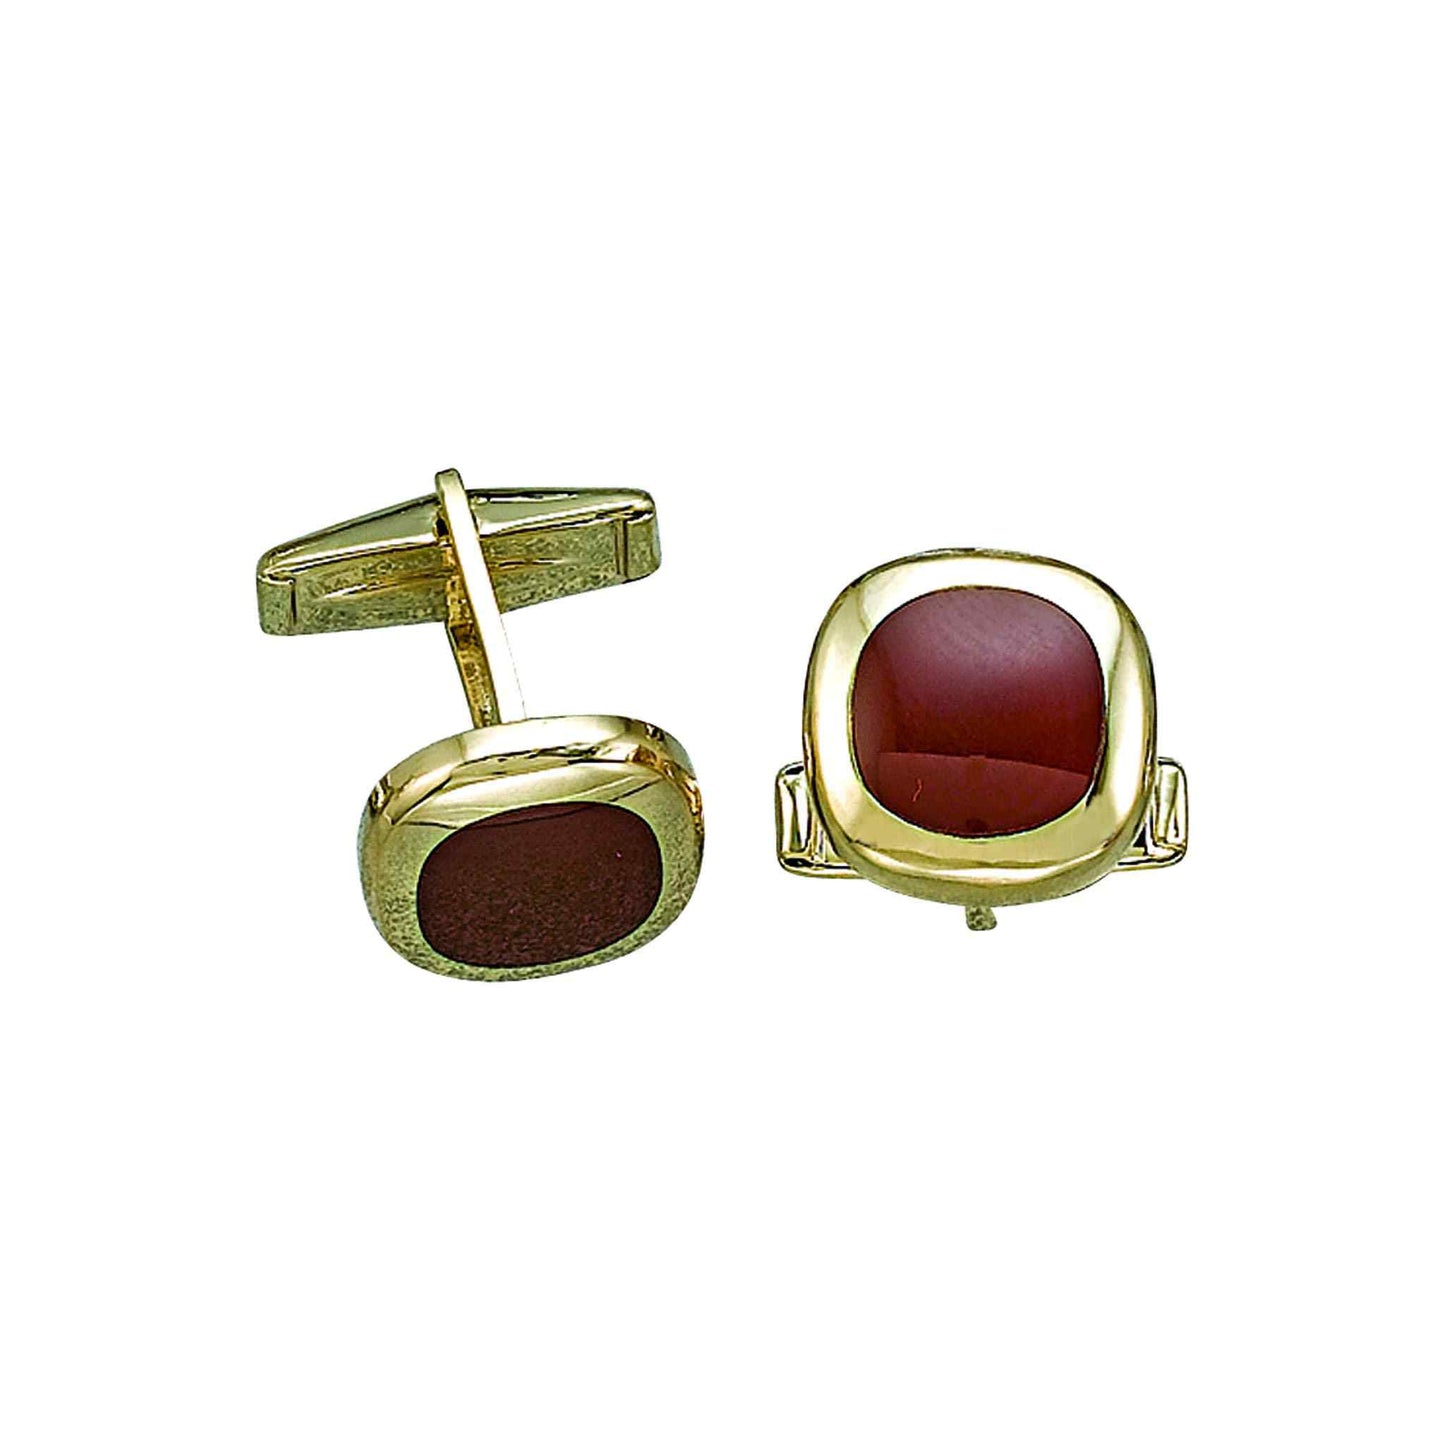 A 14k yellow gold cushion with carnelian center displayed on a neutral white background.